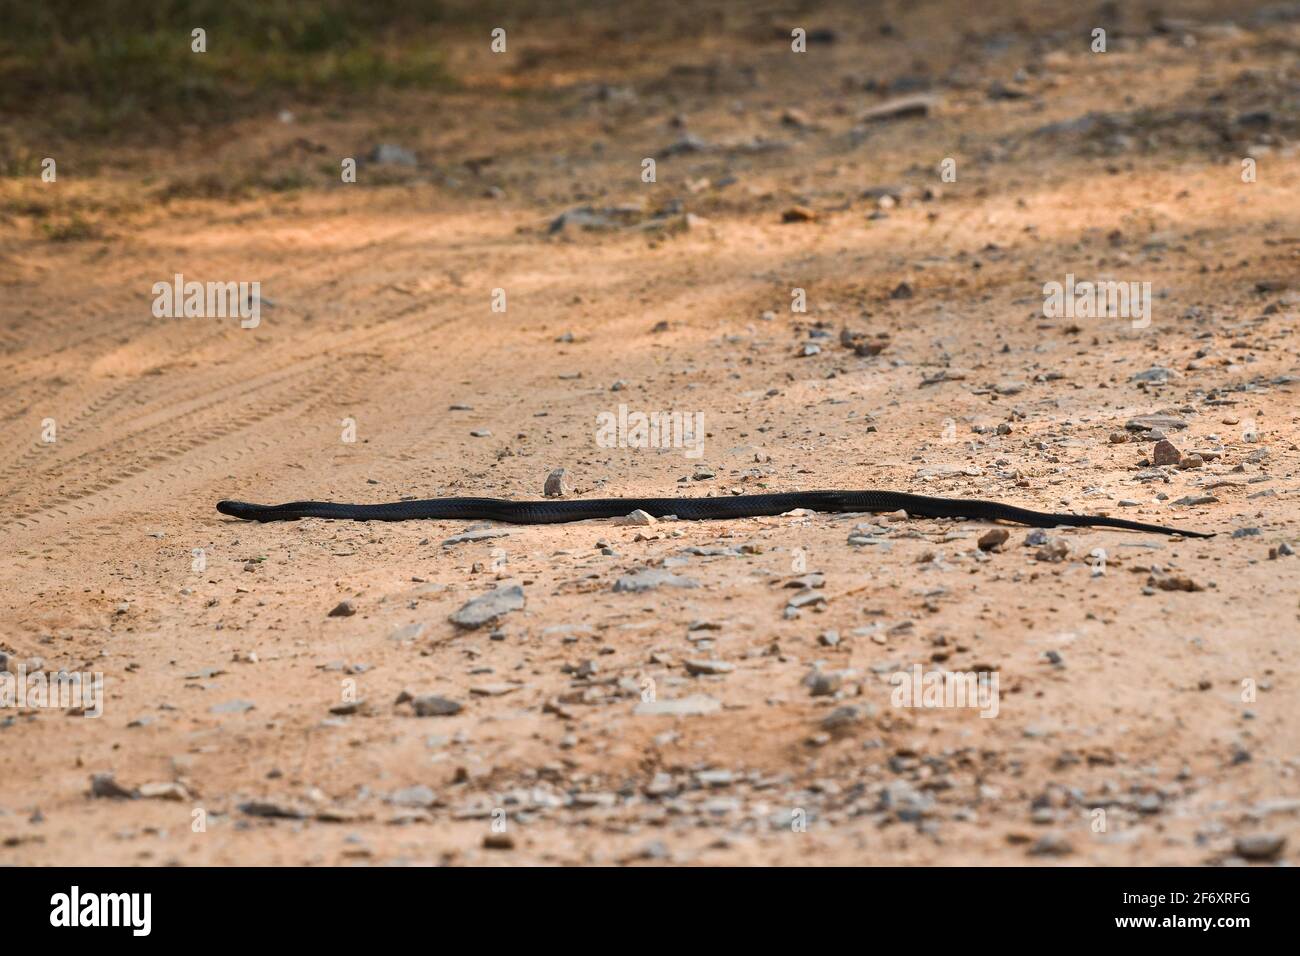 Indian cobra or Naja naja or spectacled or Asian or binocellate cobra a venomous snake or serpent crossing forest track at during outdoor jungle Stock Photo